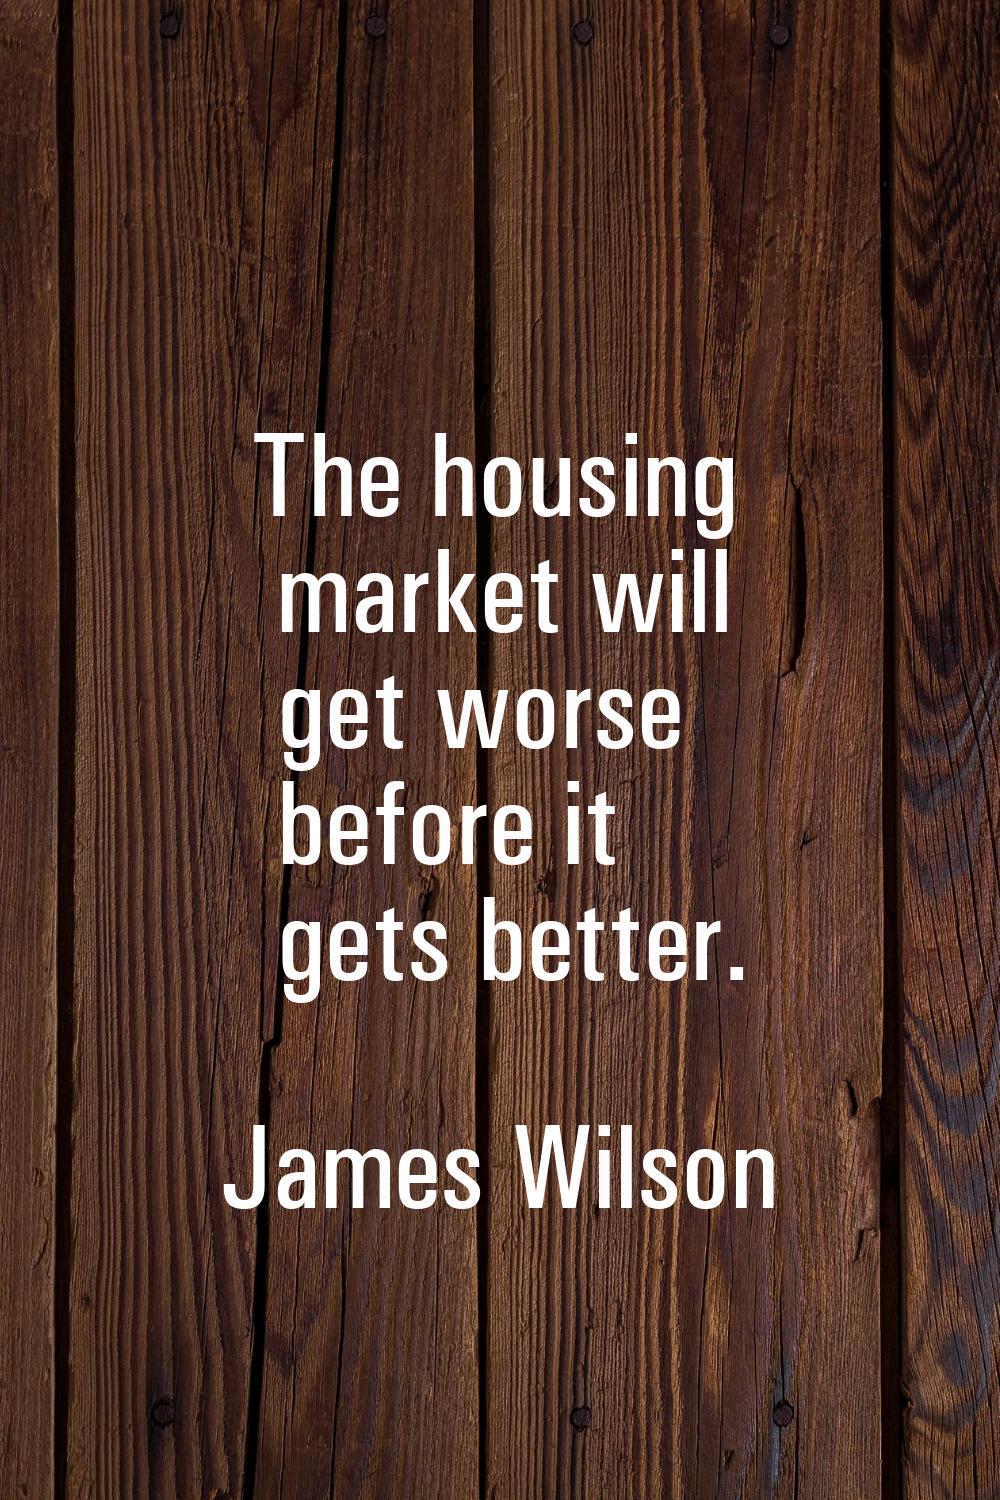 The housing market will get worse before it gets better.